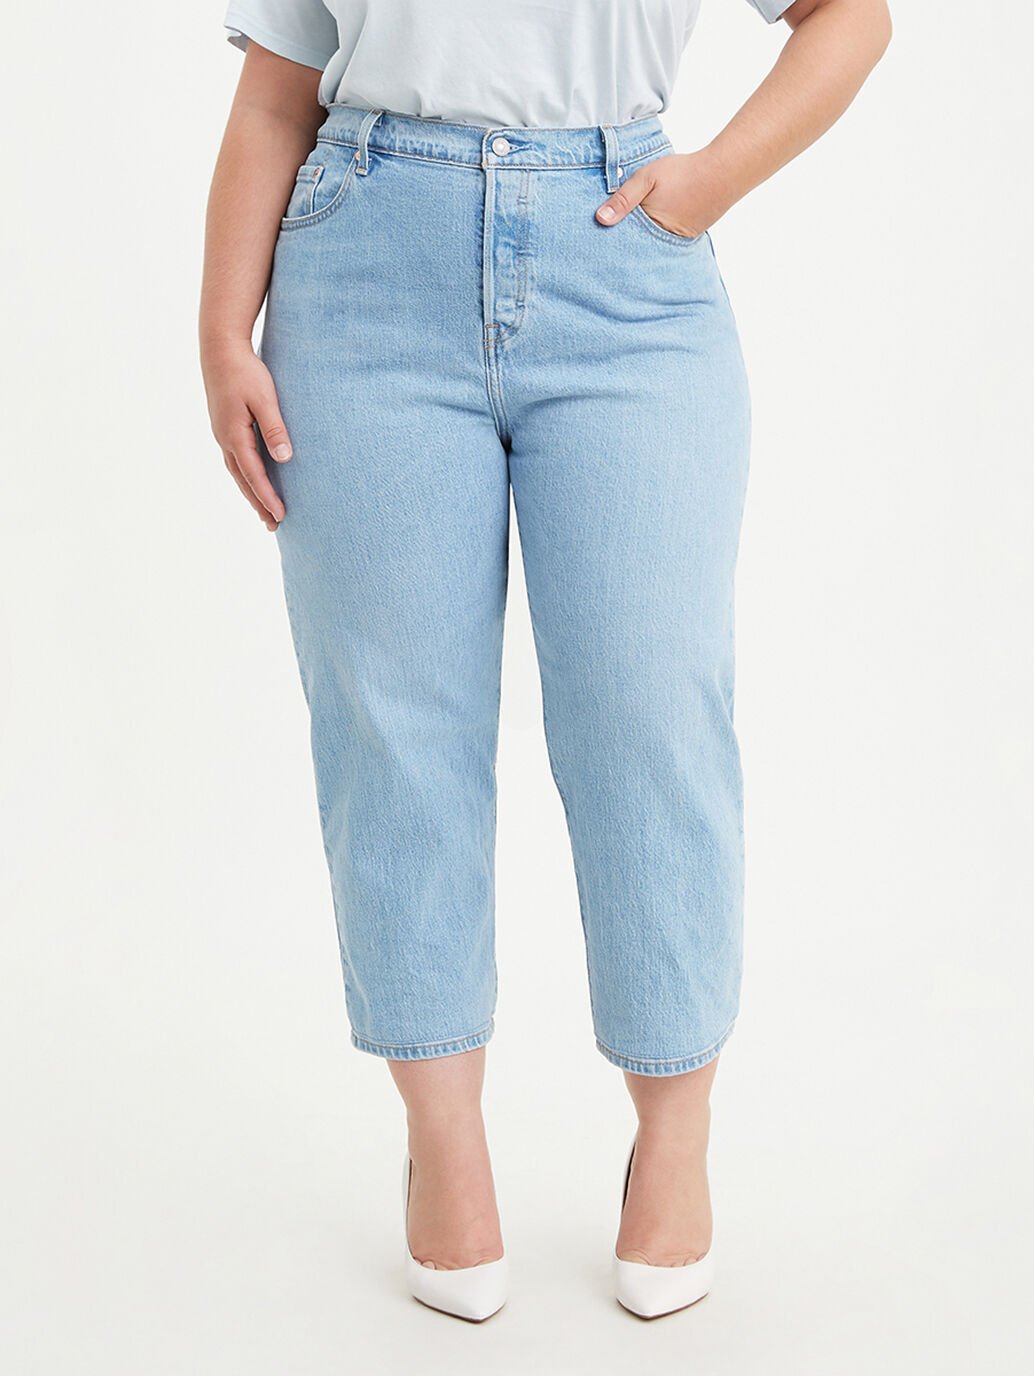 levi 501 women's jeans high waisted